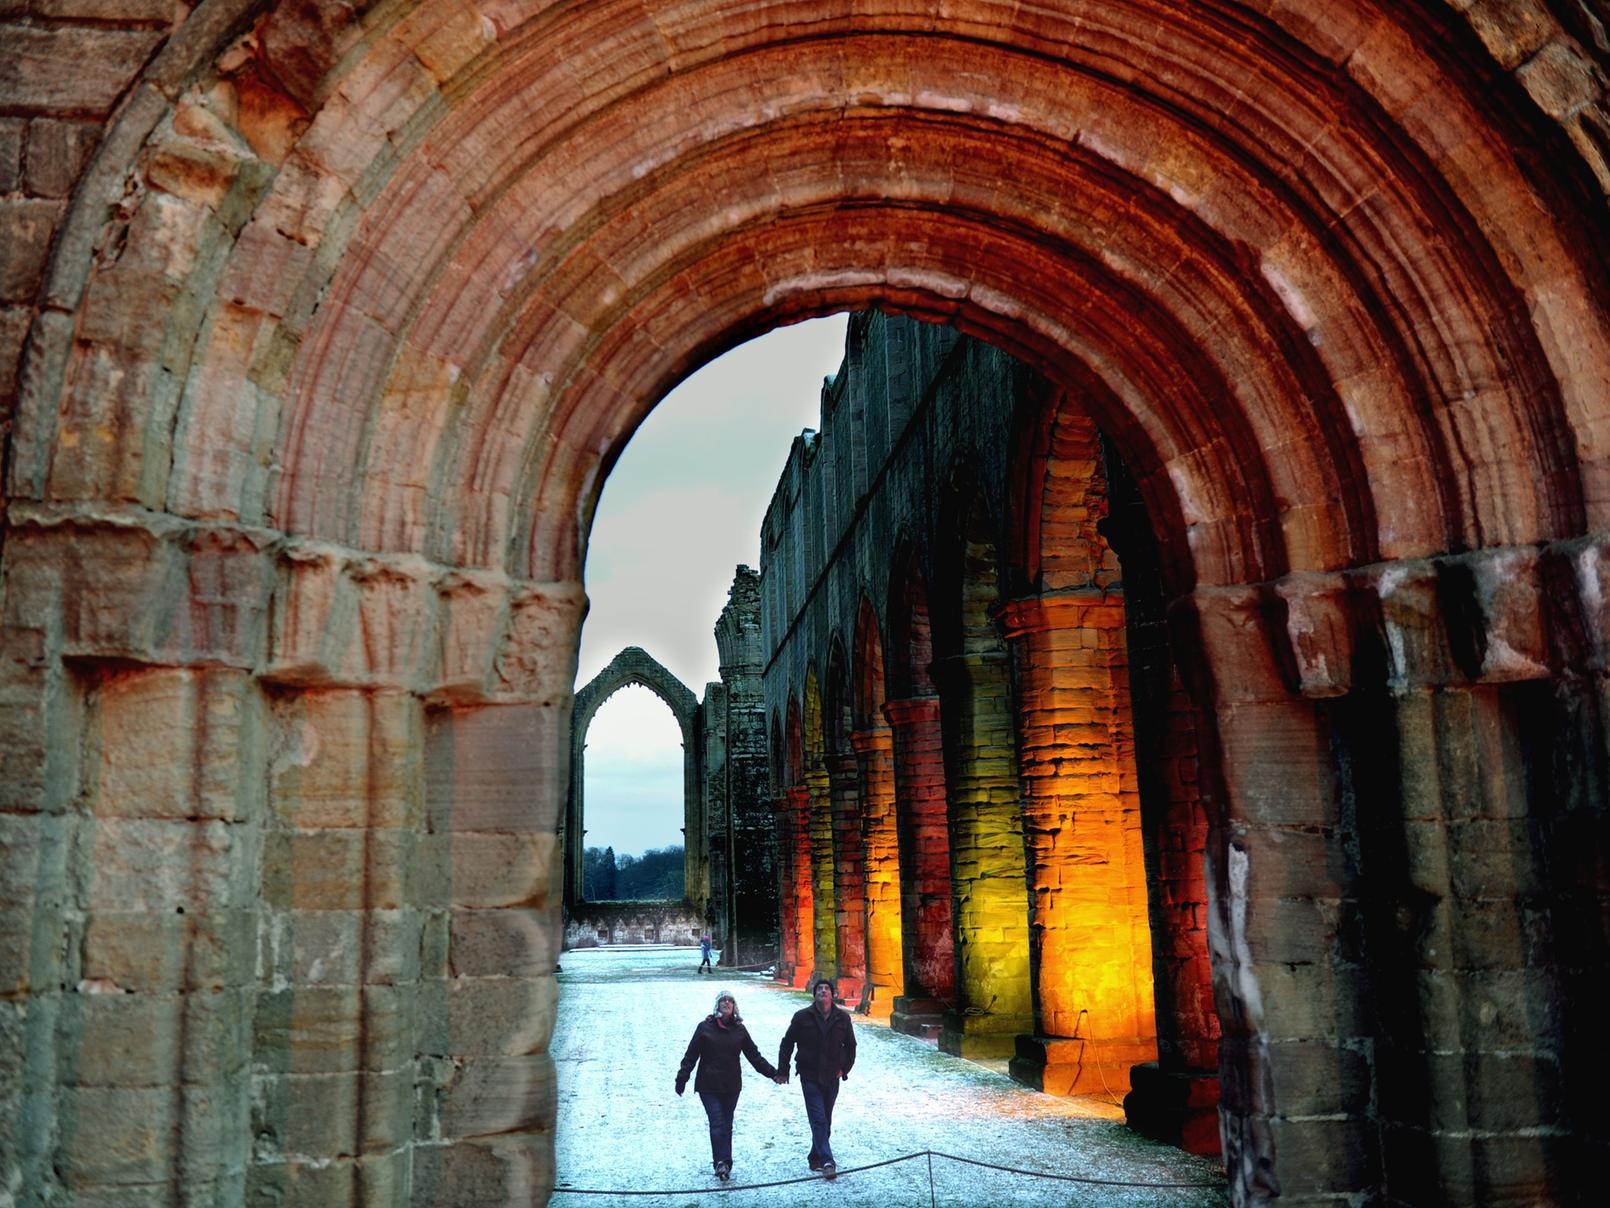 Put on your warmest coat, grab a flask and head out to Fountains Abbey to take in the Christmas Tree Trail, as well as all the other festive activities on offer. You can also visit Santa and see the ruins all lit up.